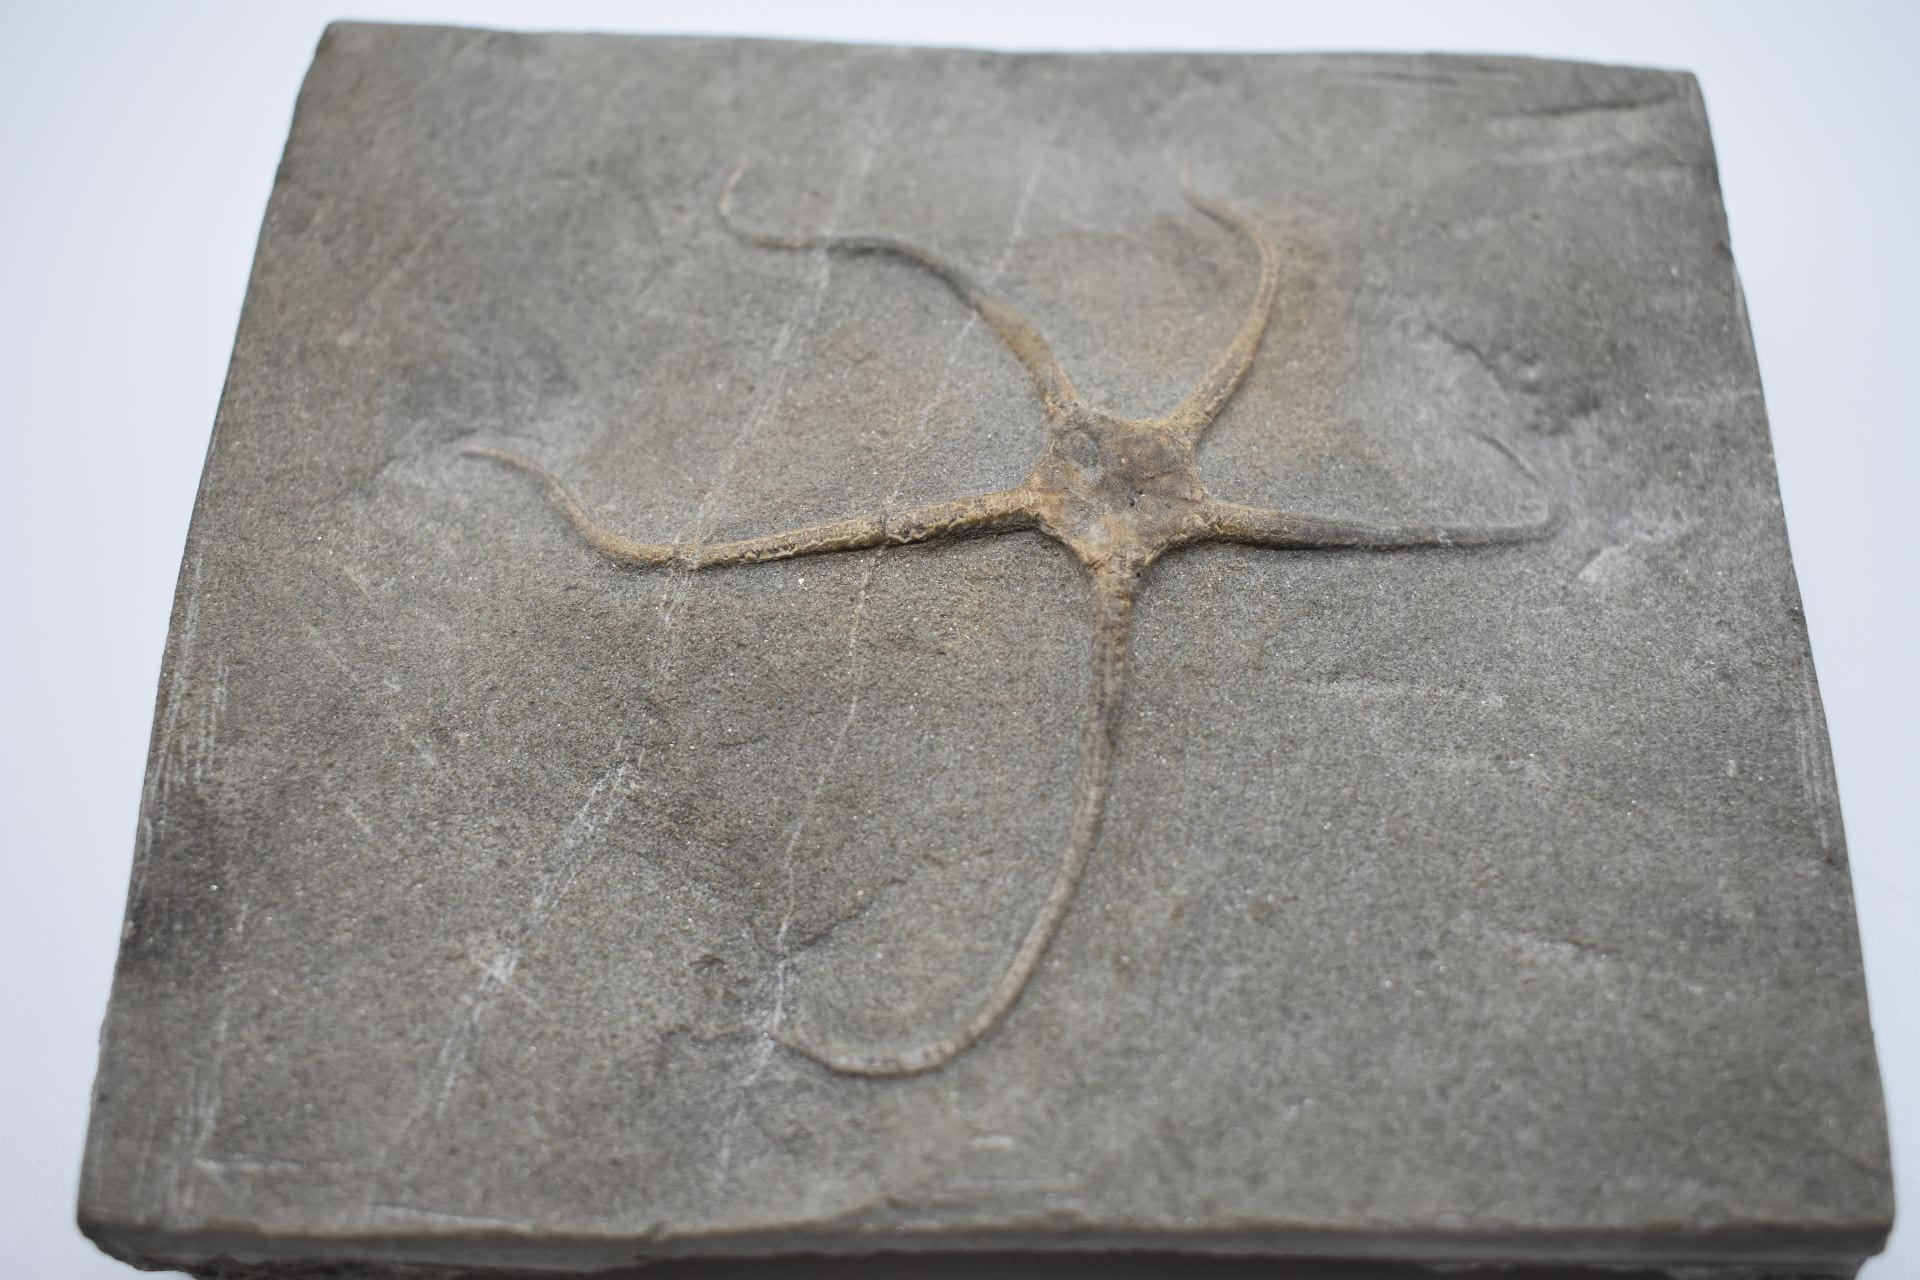 A flat gray slab of rock with the outline of a star-like animal - a central area with five appendages radiating out from it.